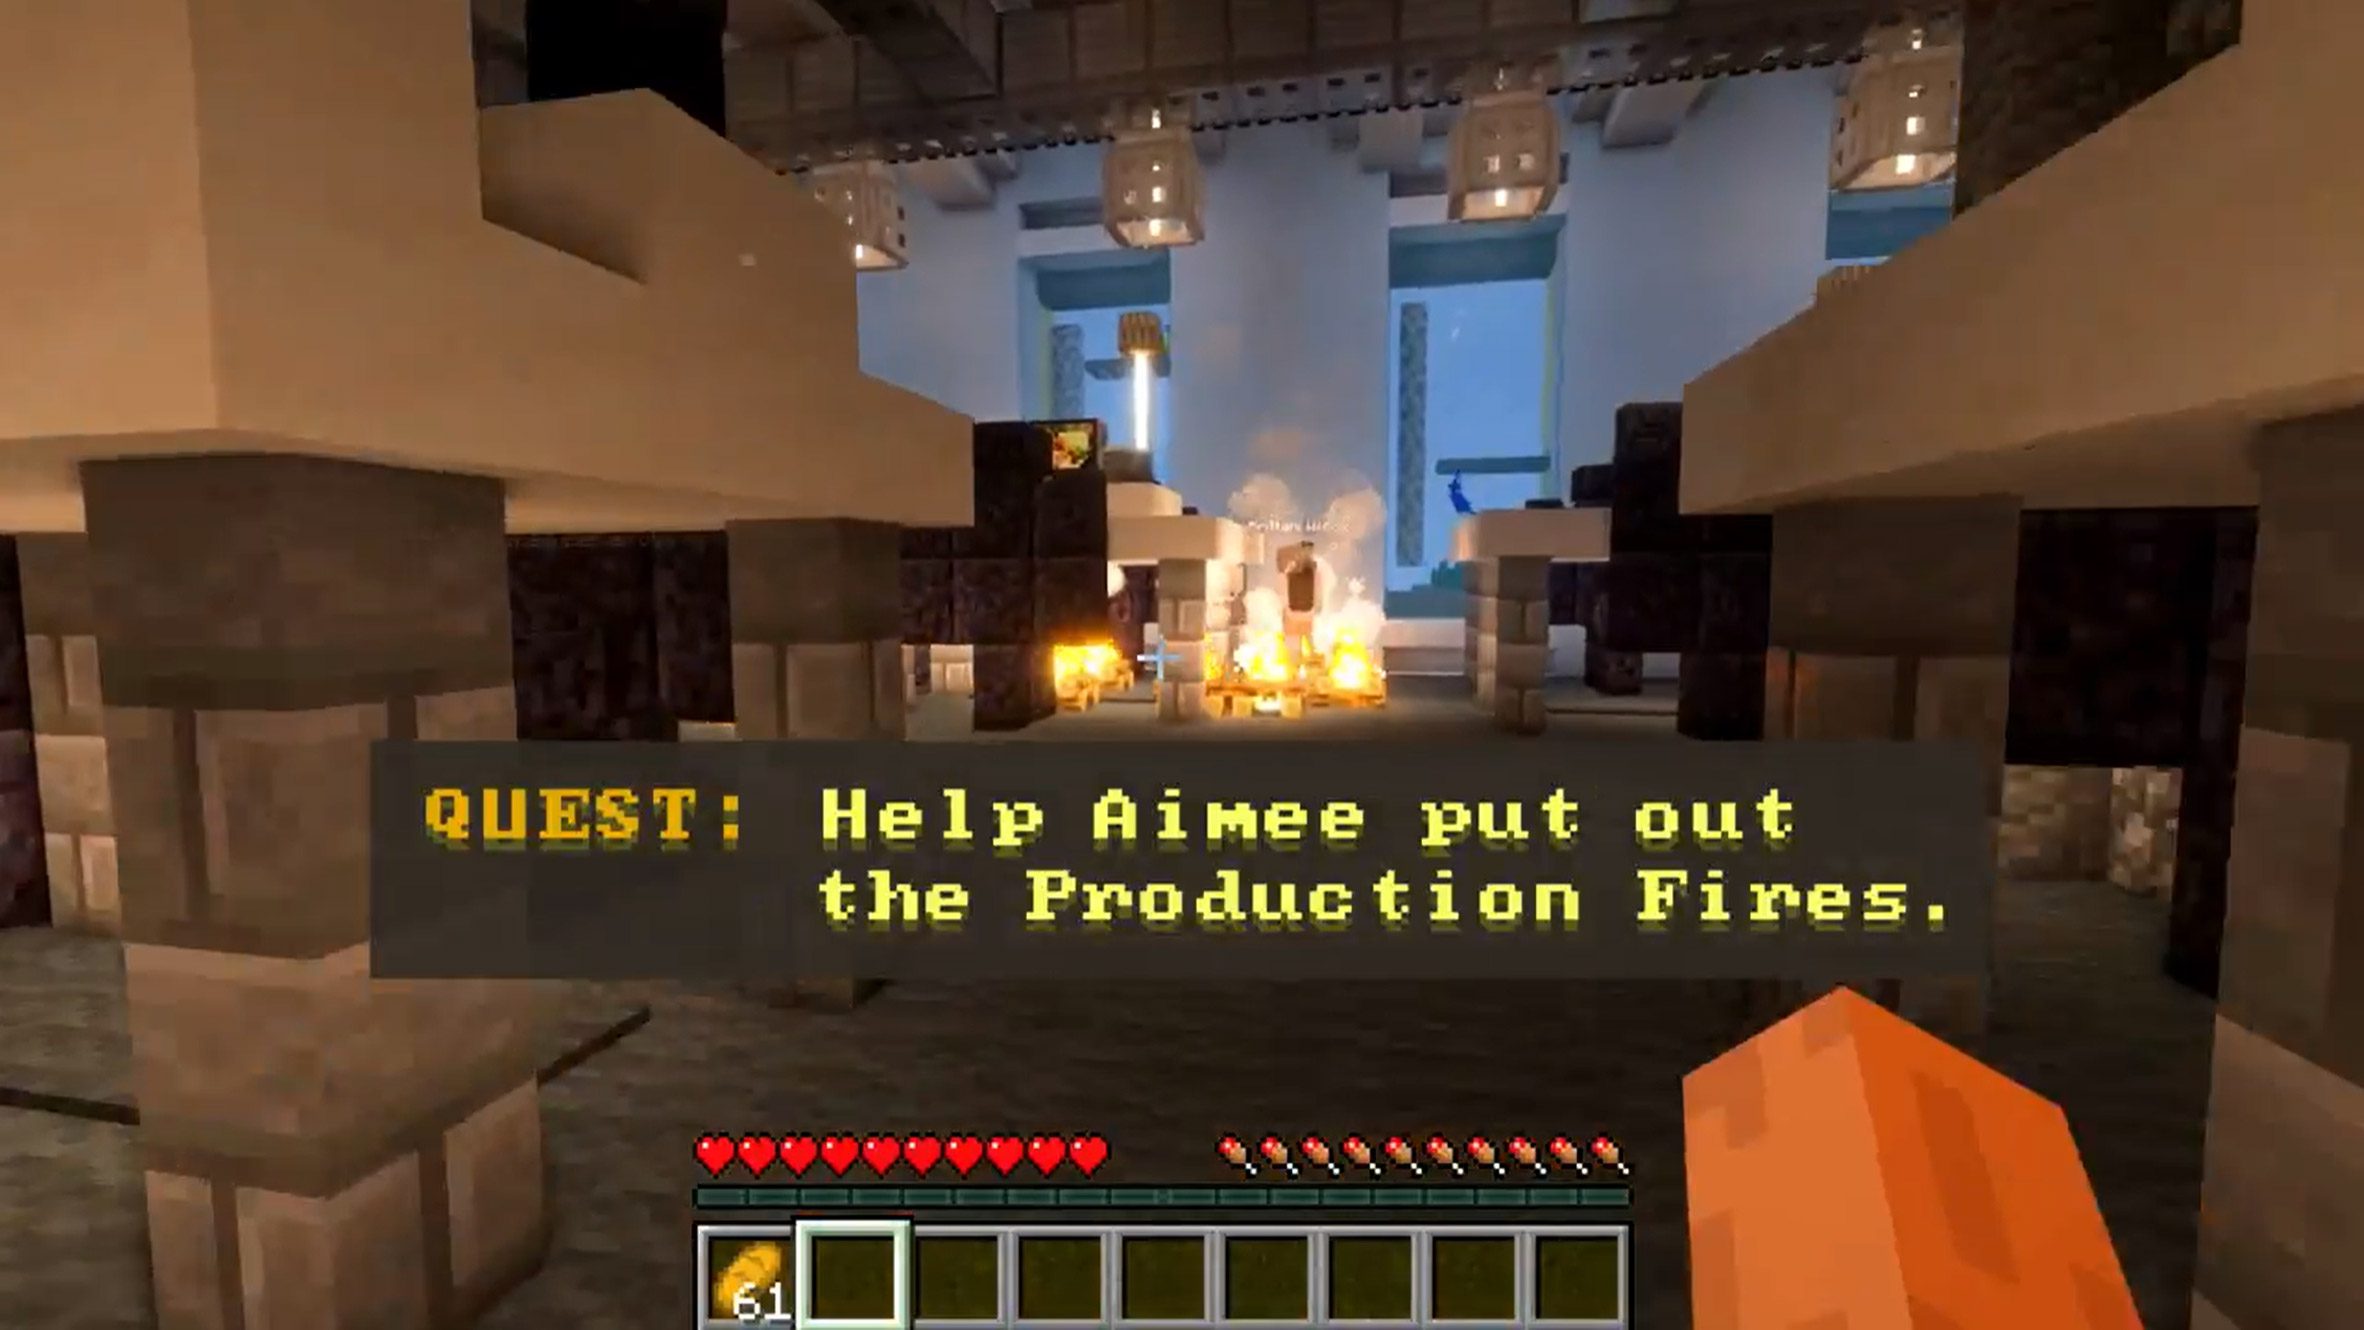 In-game screenshot by WPP showing user putting out a Production Fire